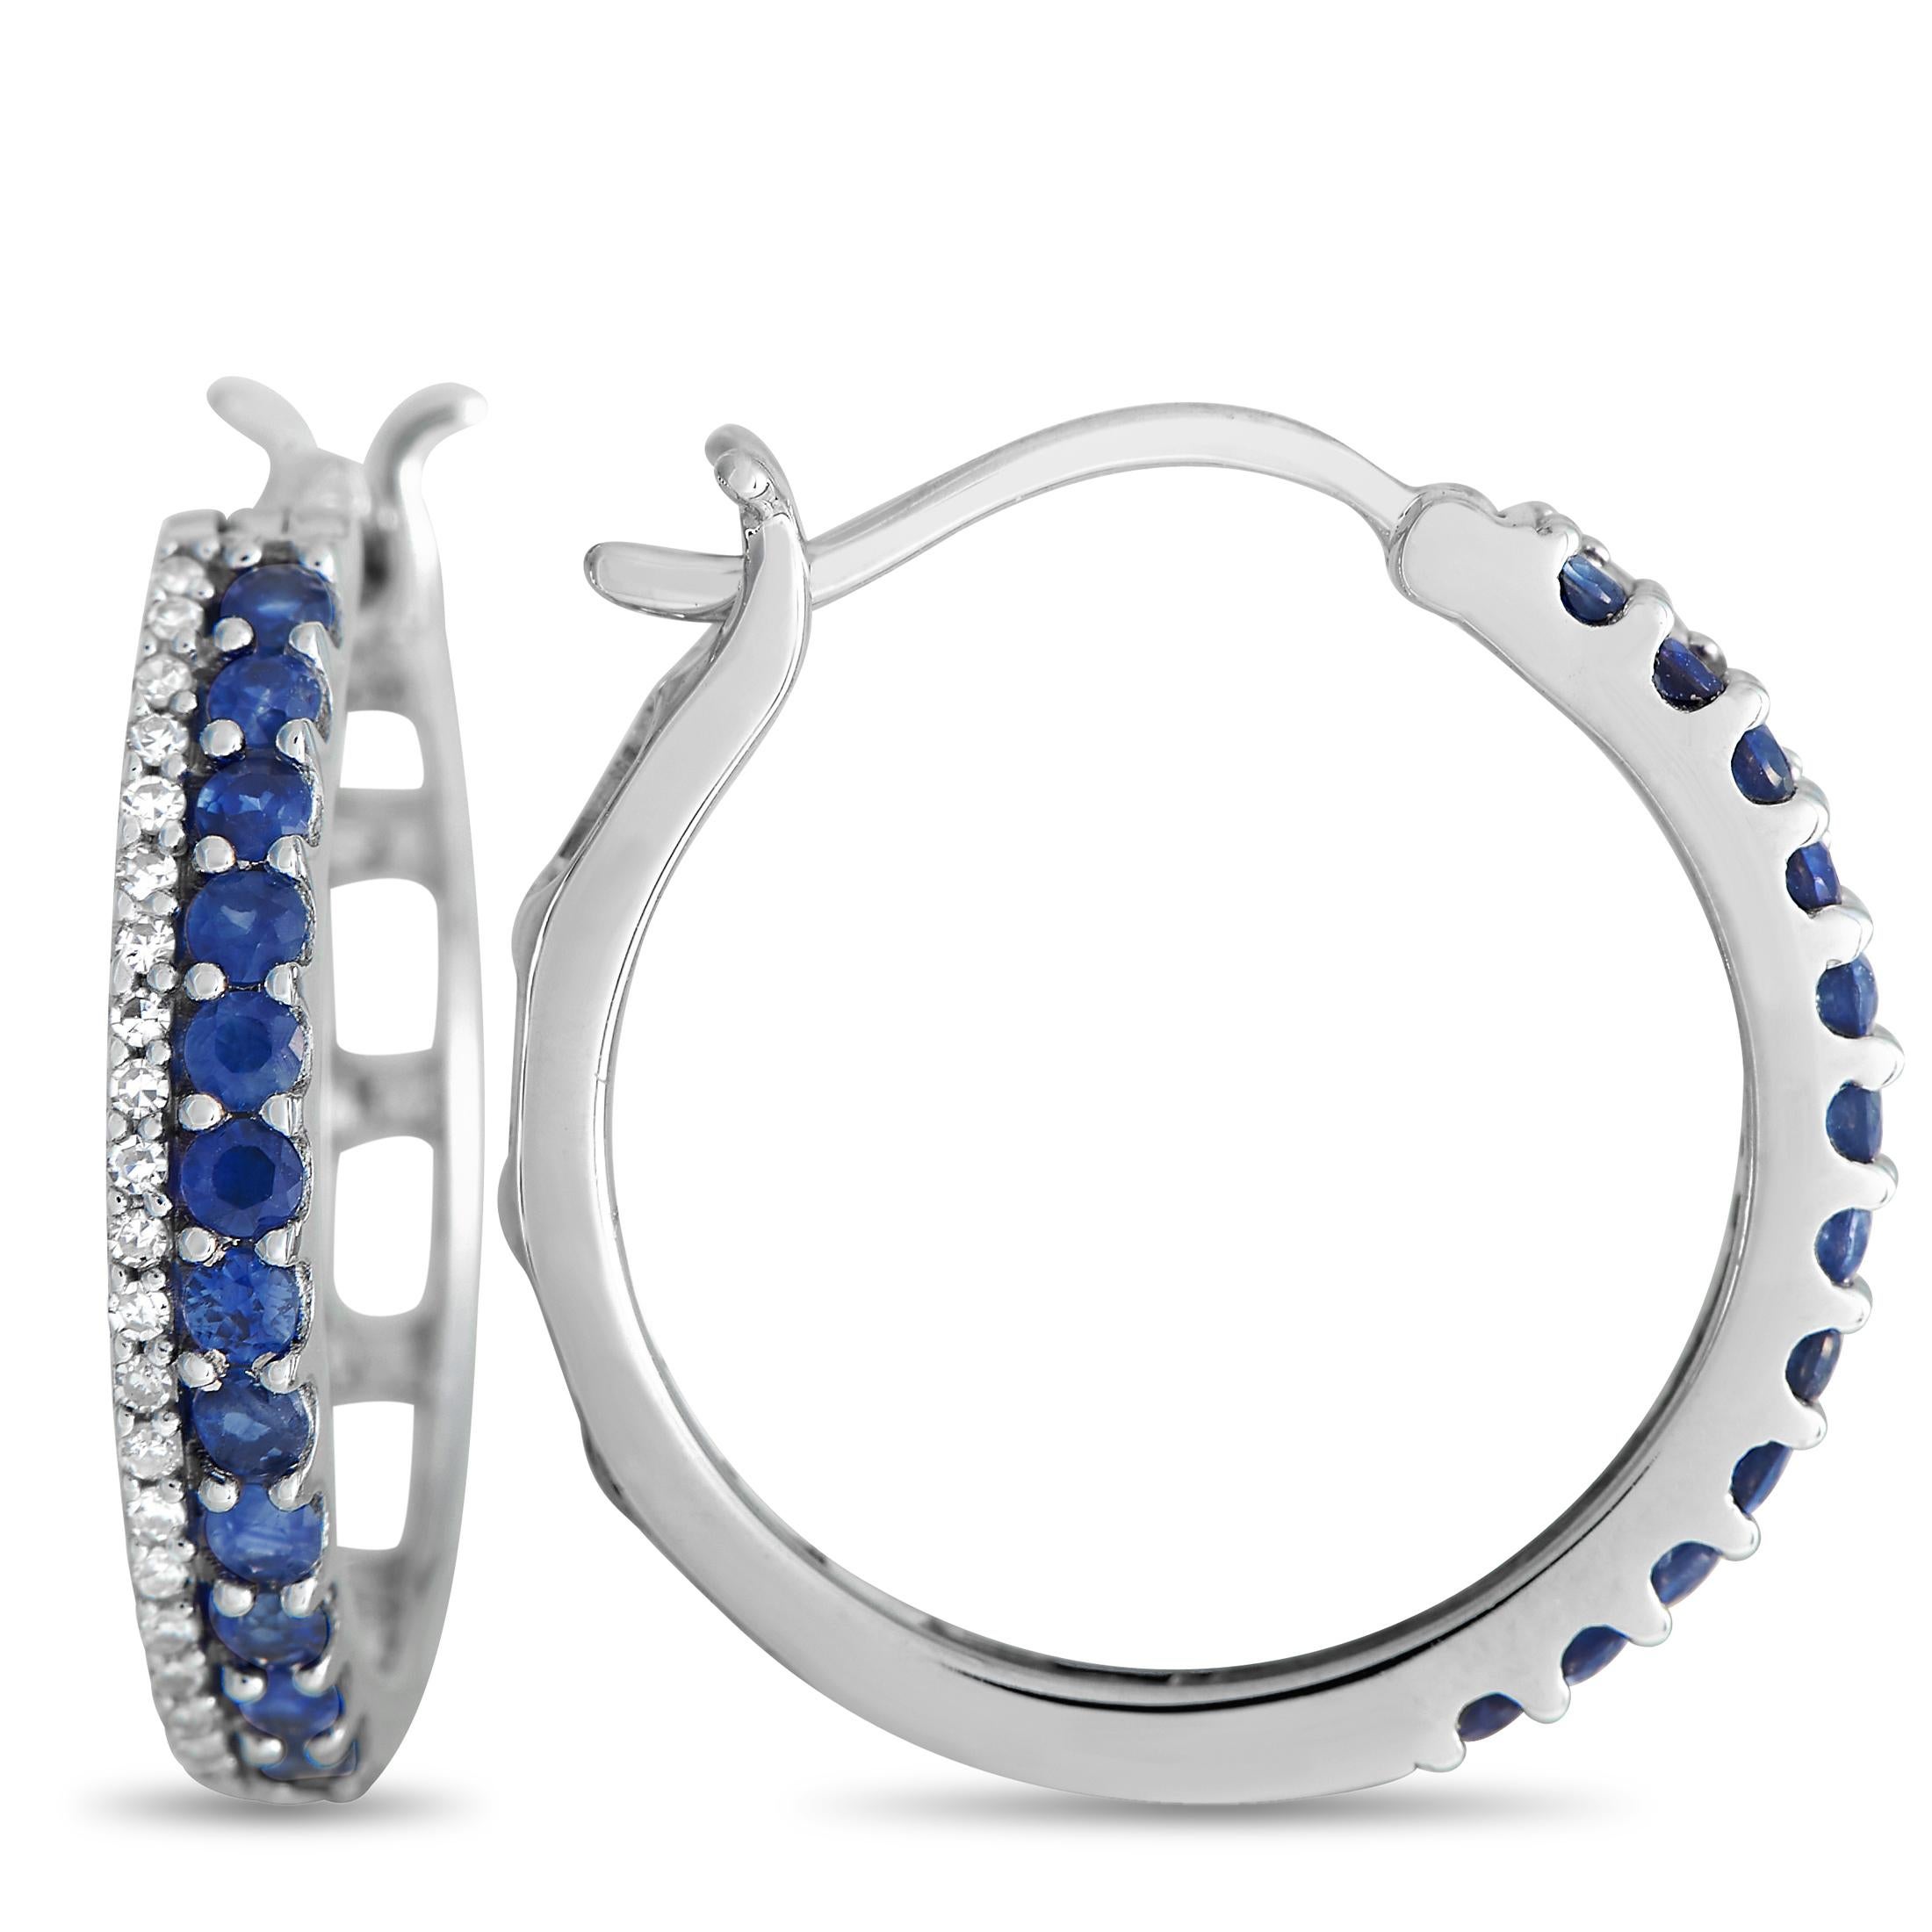 These earrings deliver a classy statement, no matter which outfit you pair them with. Each hoop measures less than an inch in diameter and is relatively lightweight. The hoops feature a row of petite round diamonds on shared prongs next to a row of